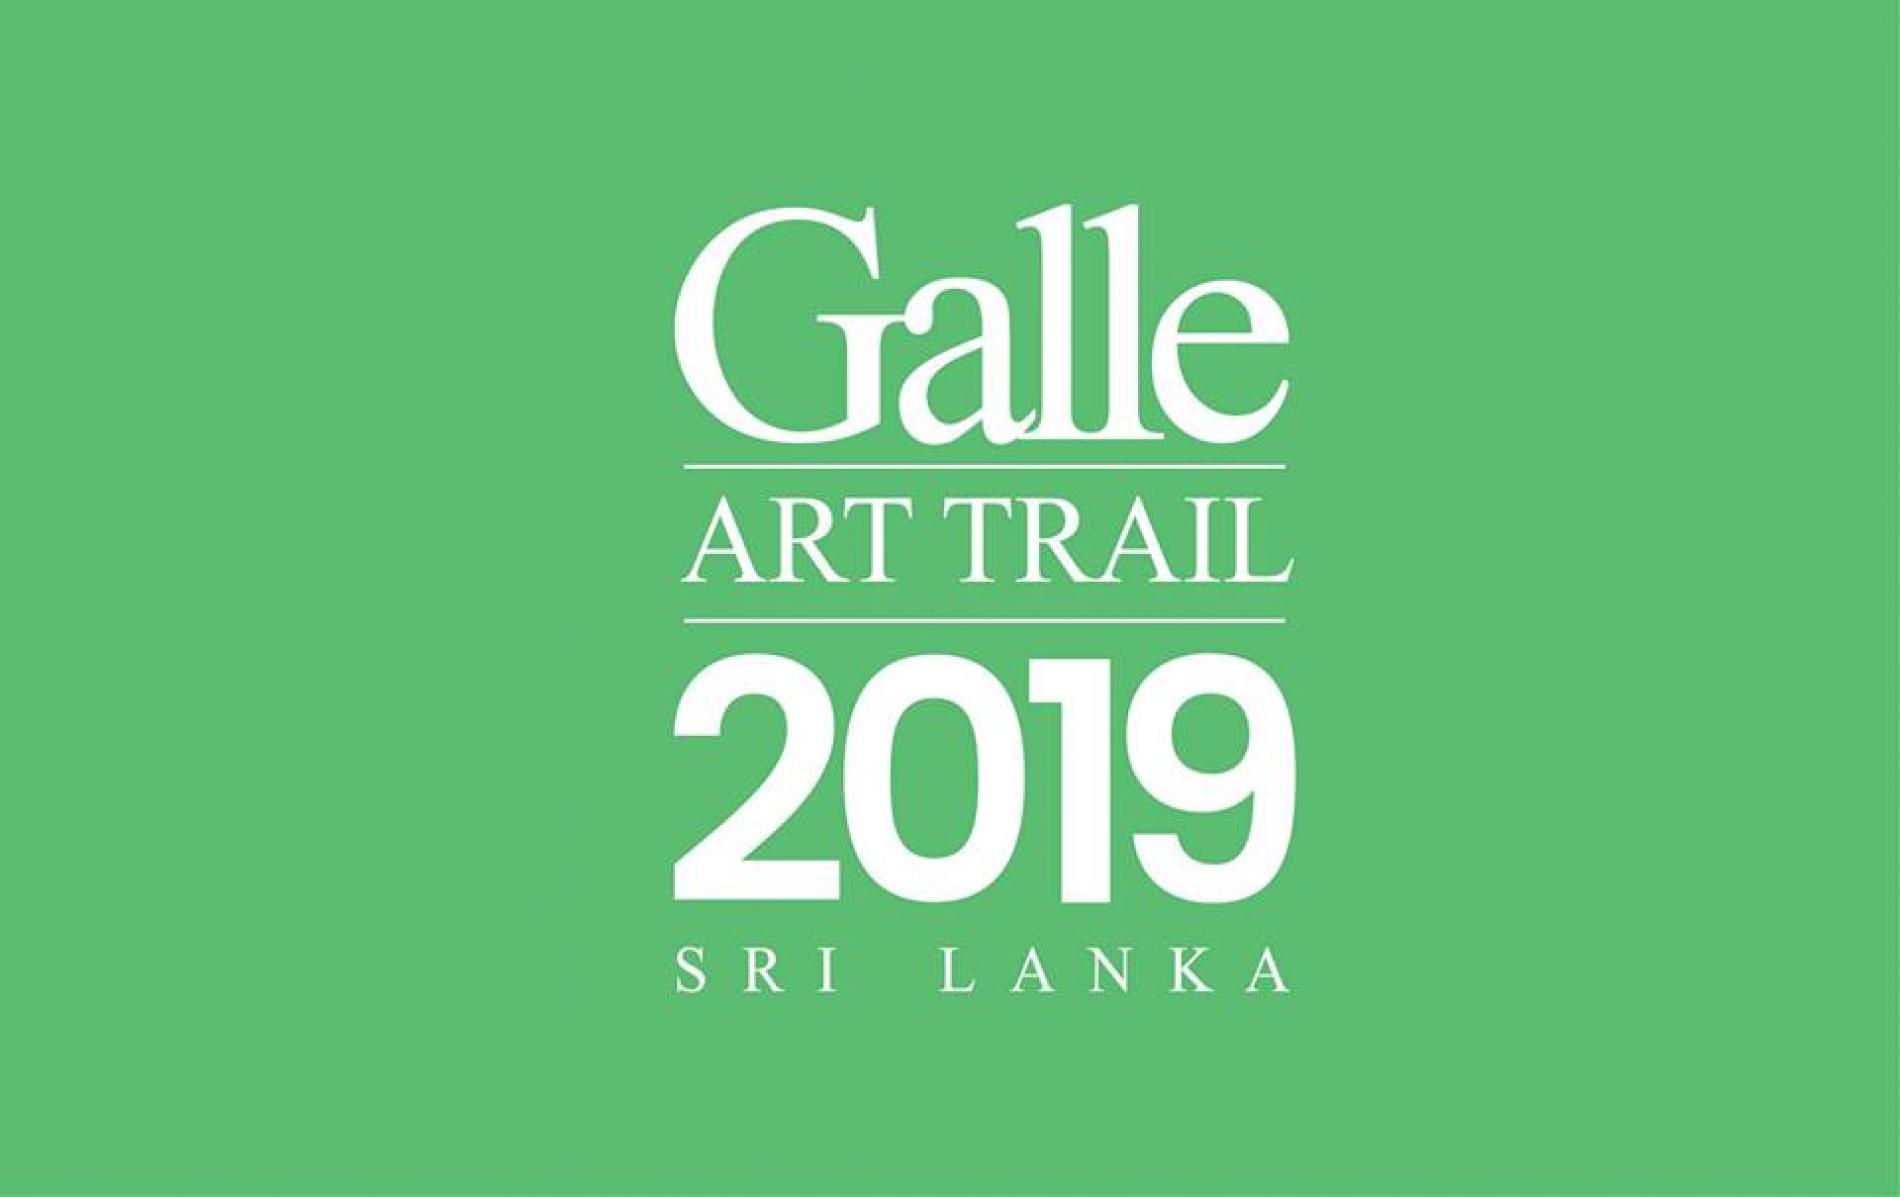 The Galle Art Trail